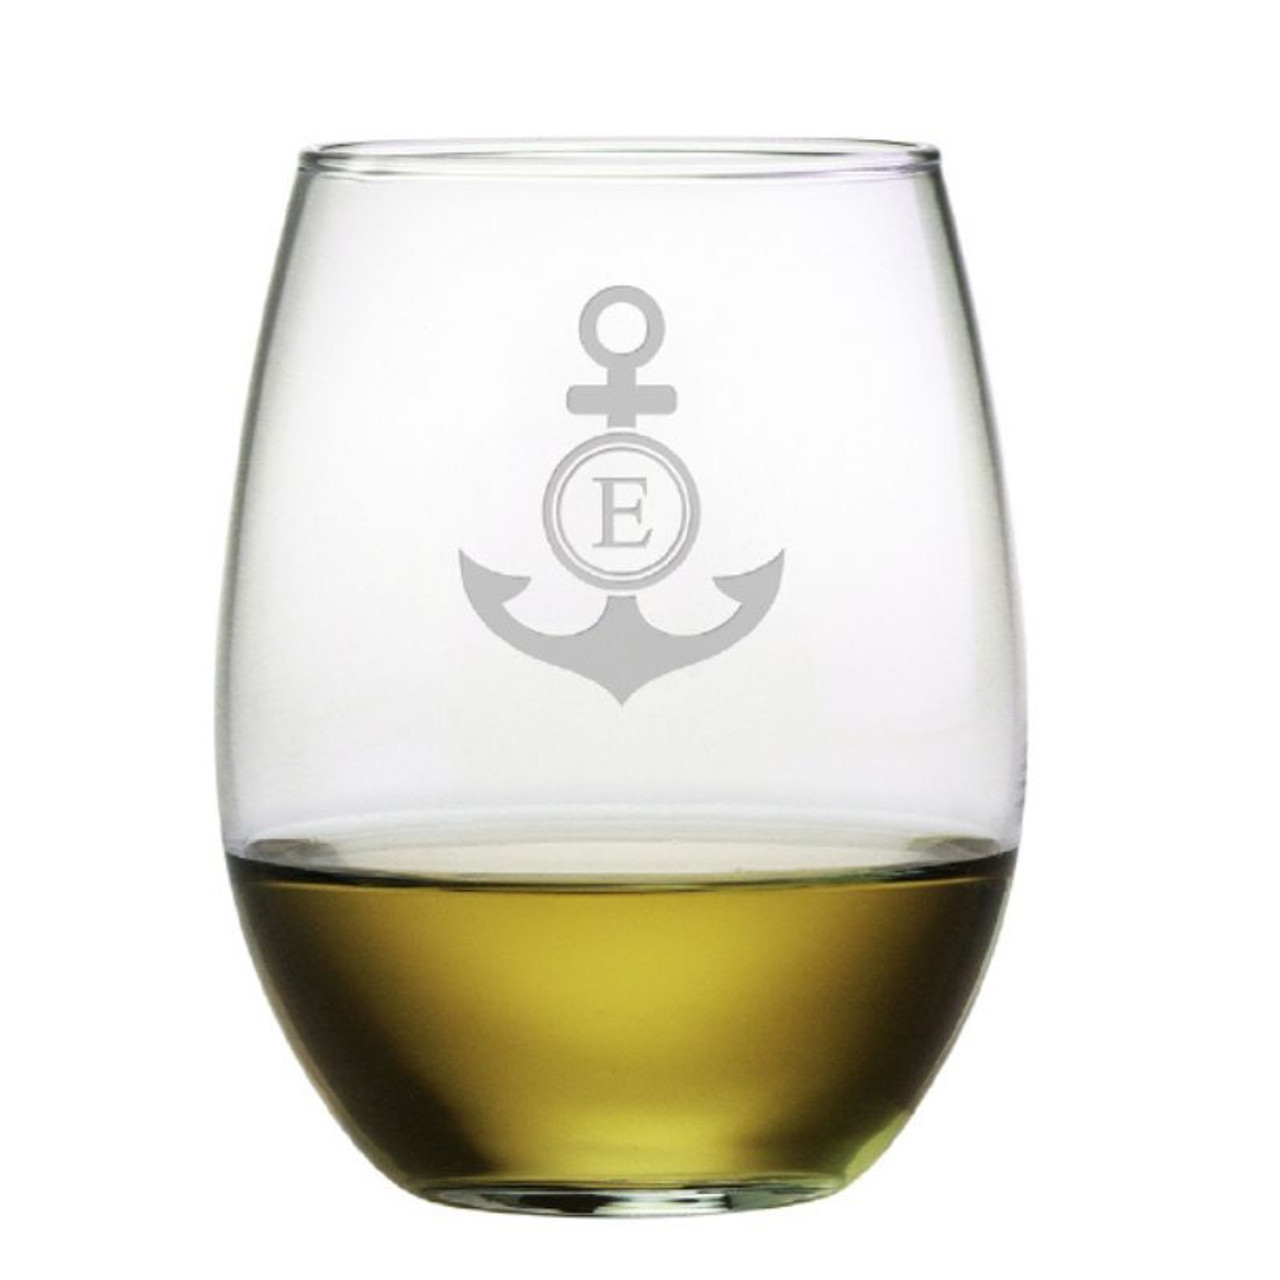 https://cdn11.bigcommerce.com/s-262q5dgaa3/images/stencil/1280x1280/products/11542/22895/stemless-wine-glass-with-monogram-anchor-set-of-4-4__73396.1661180871.jpg?c=1